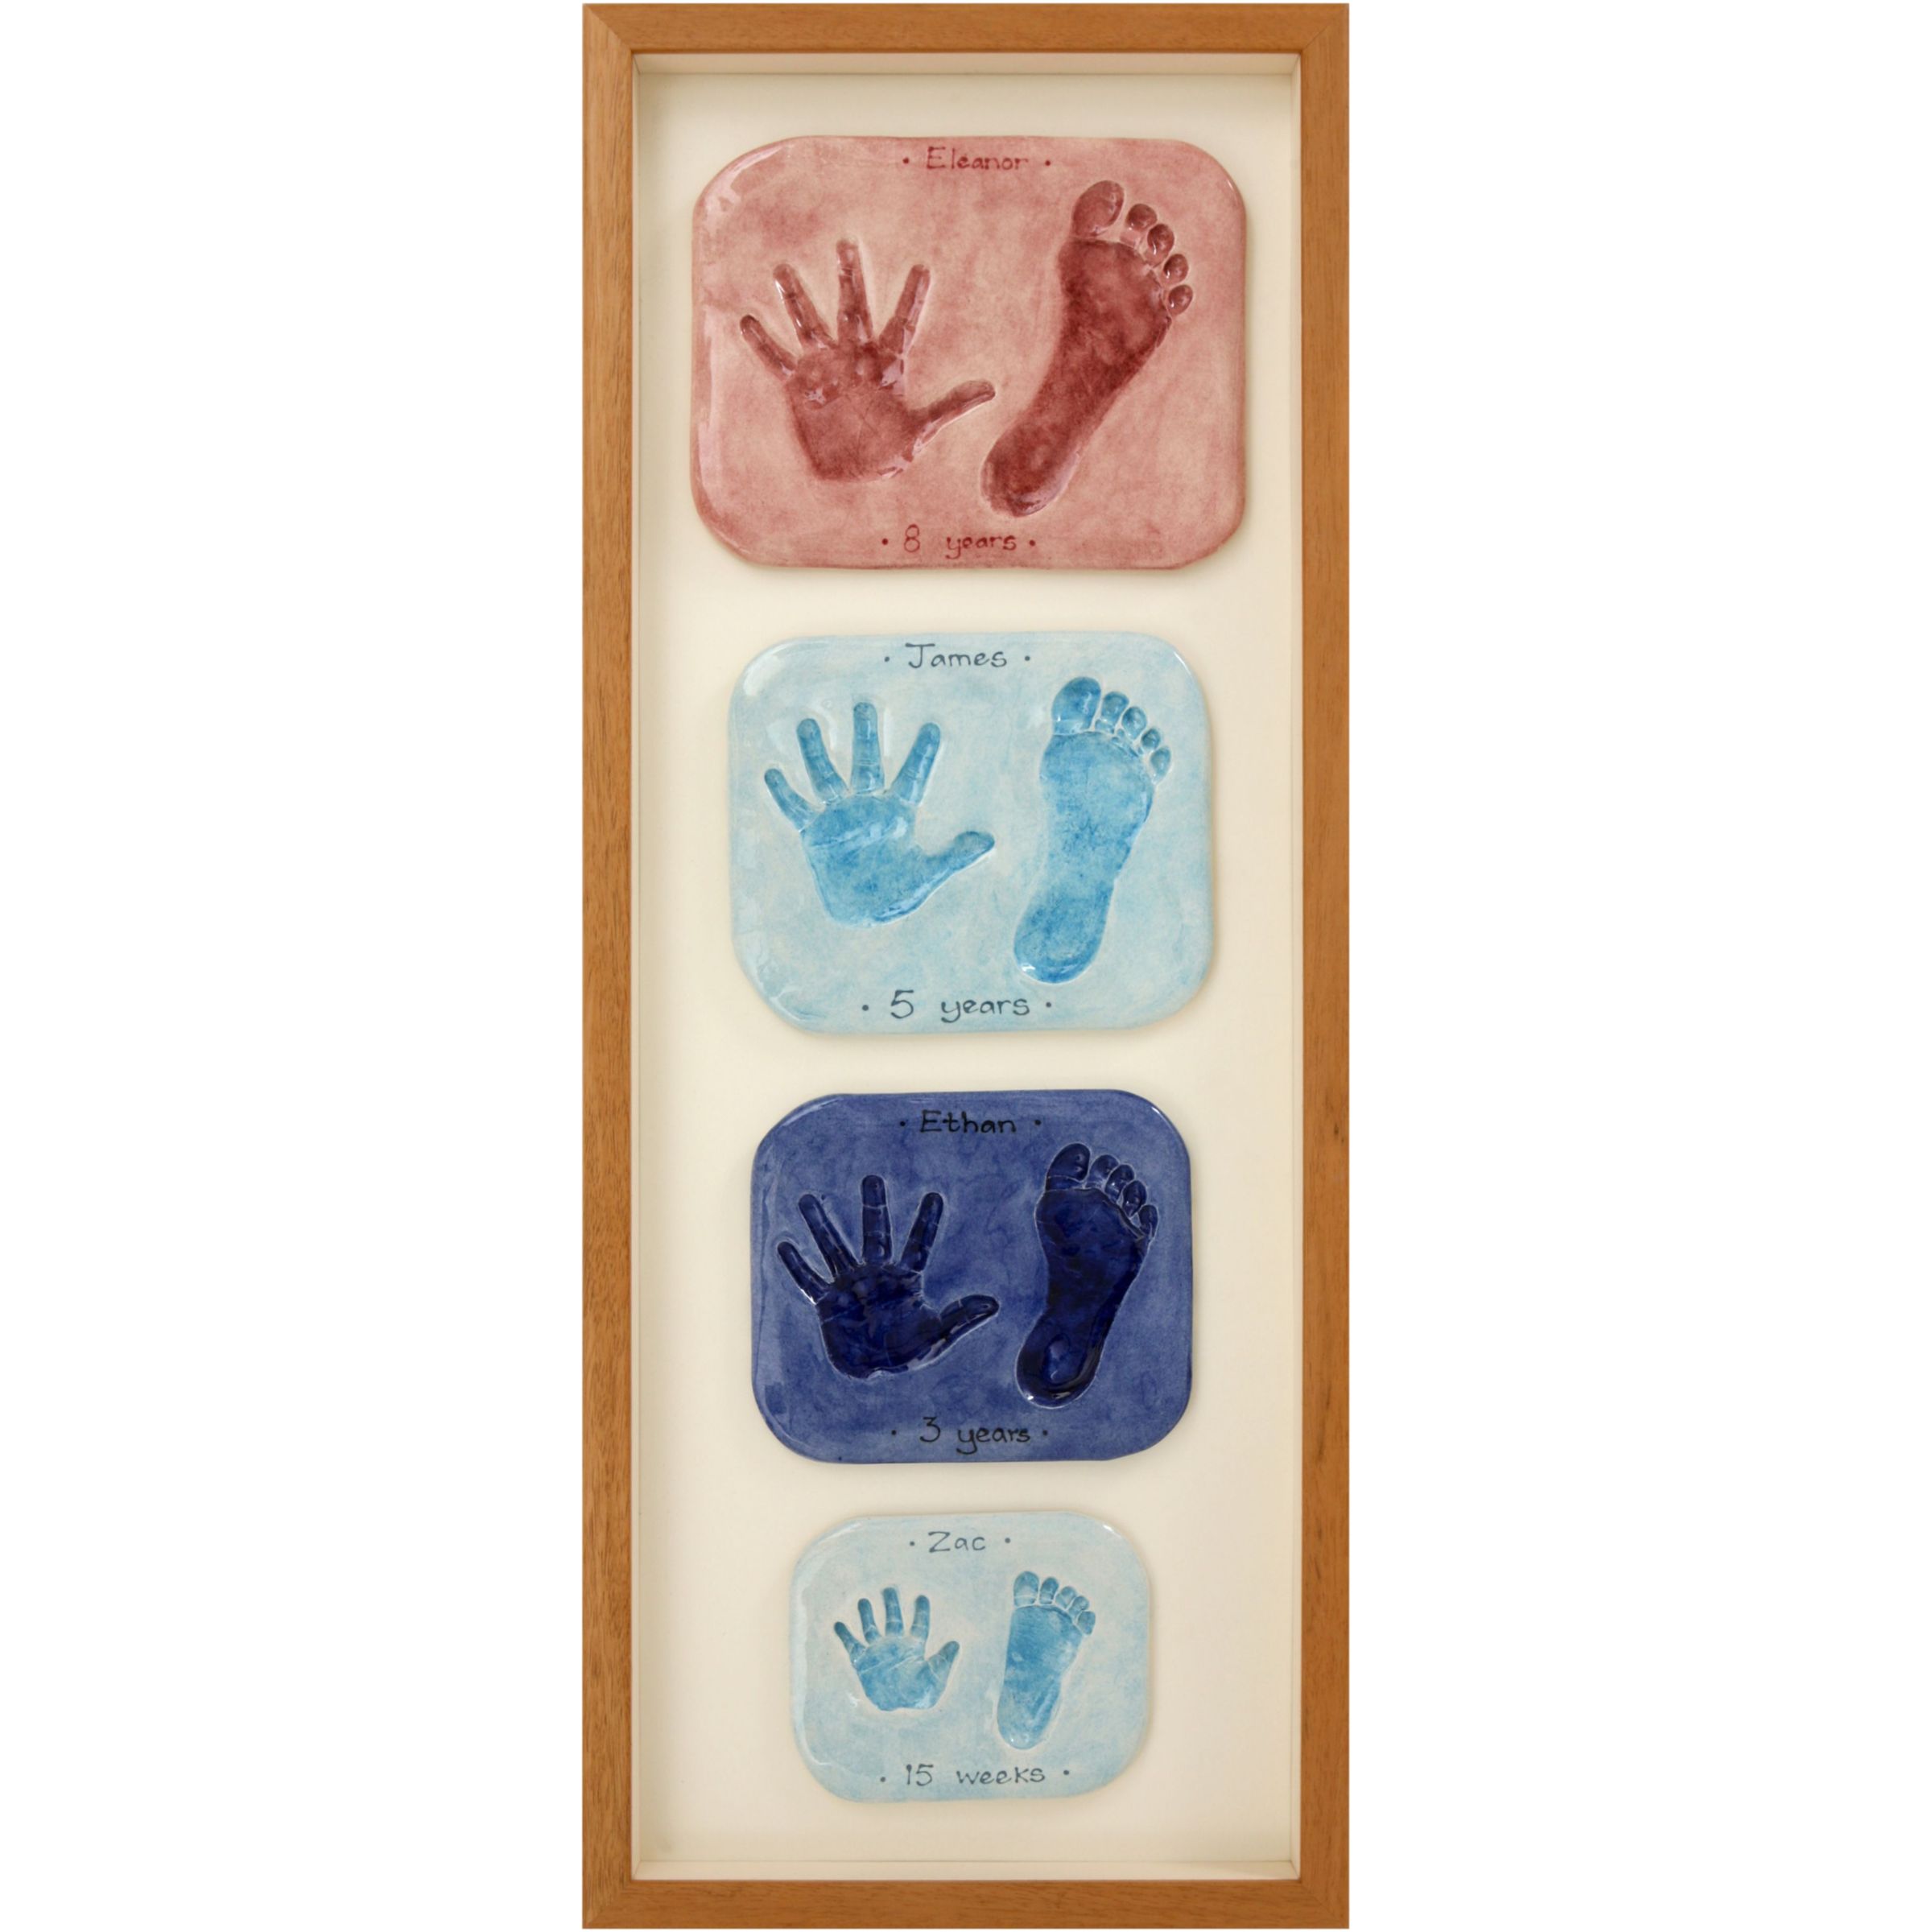 Imprints Gift Certificate, 4 Double Family Prints, Natural Pine or Whitewash Frame at John Lewis